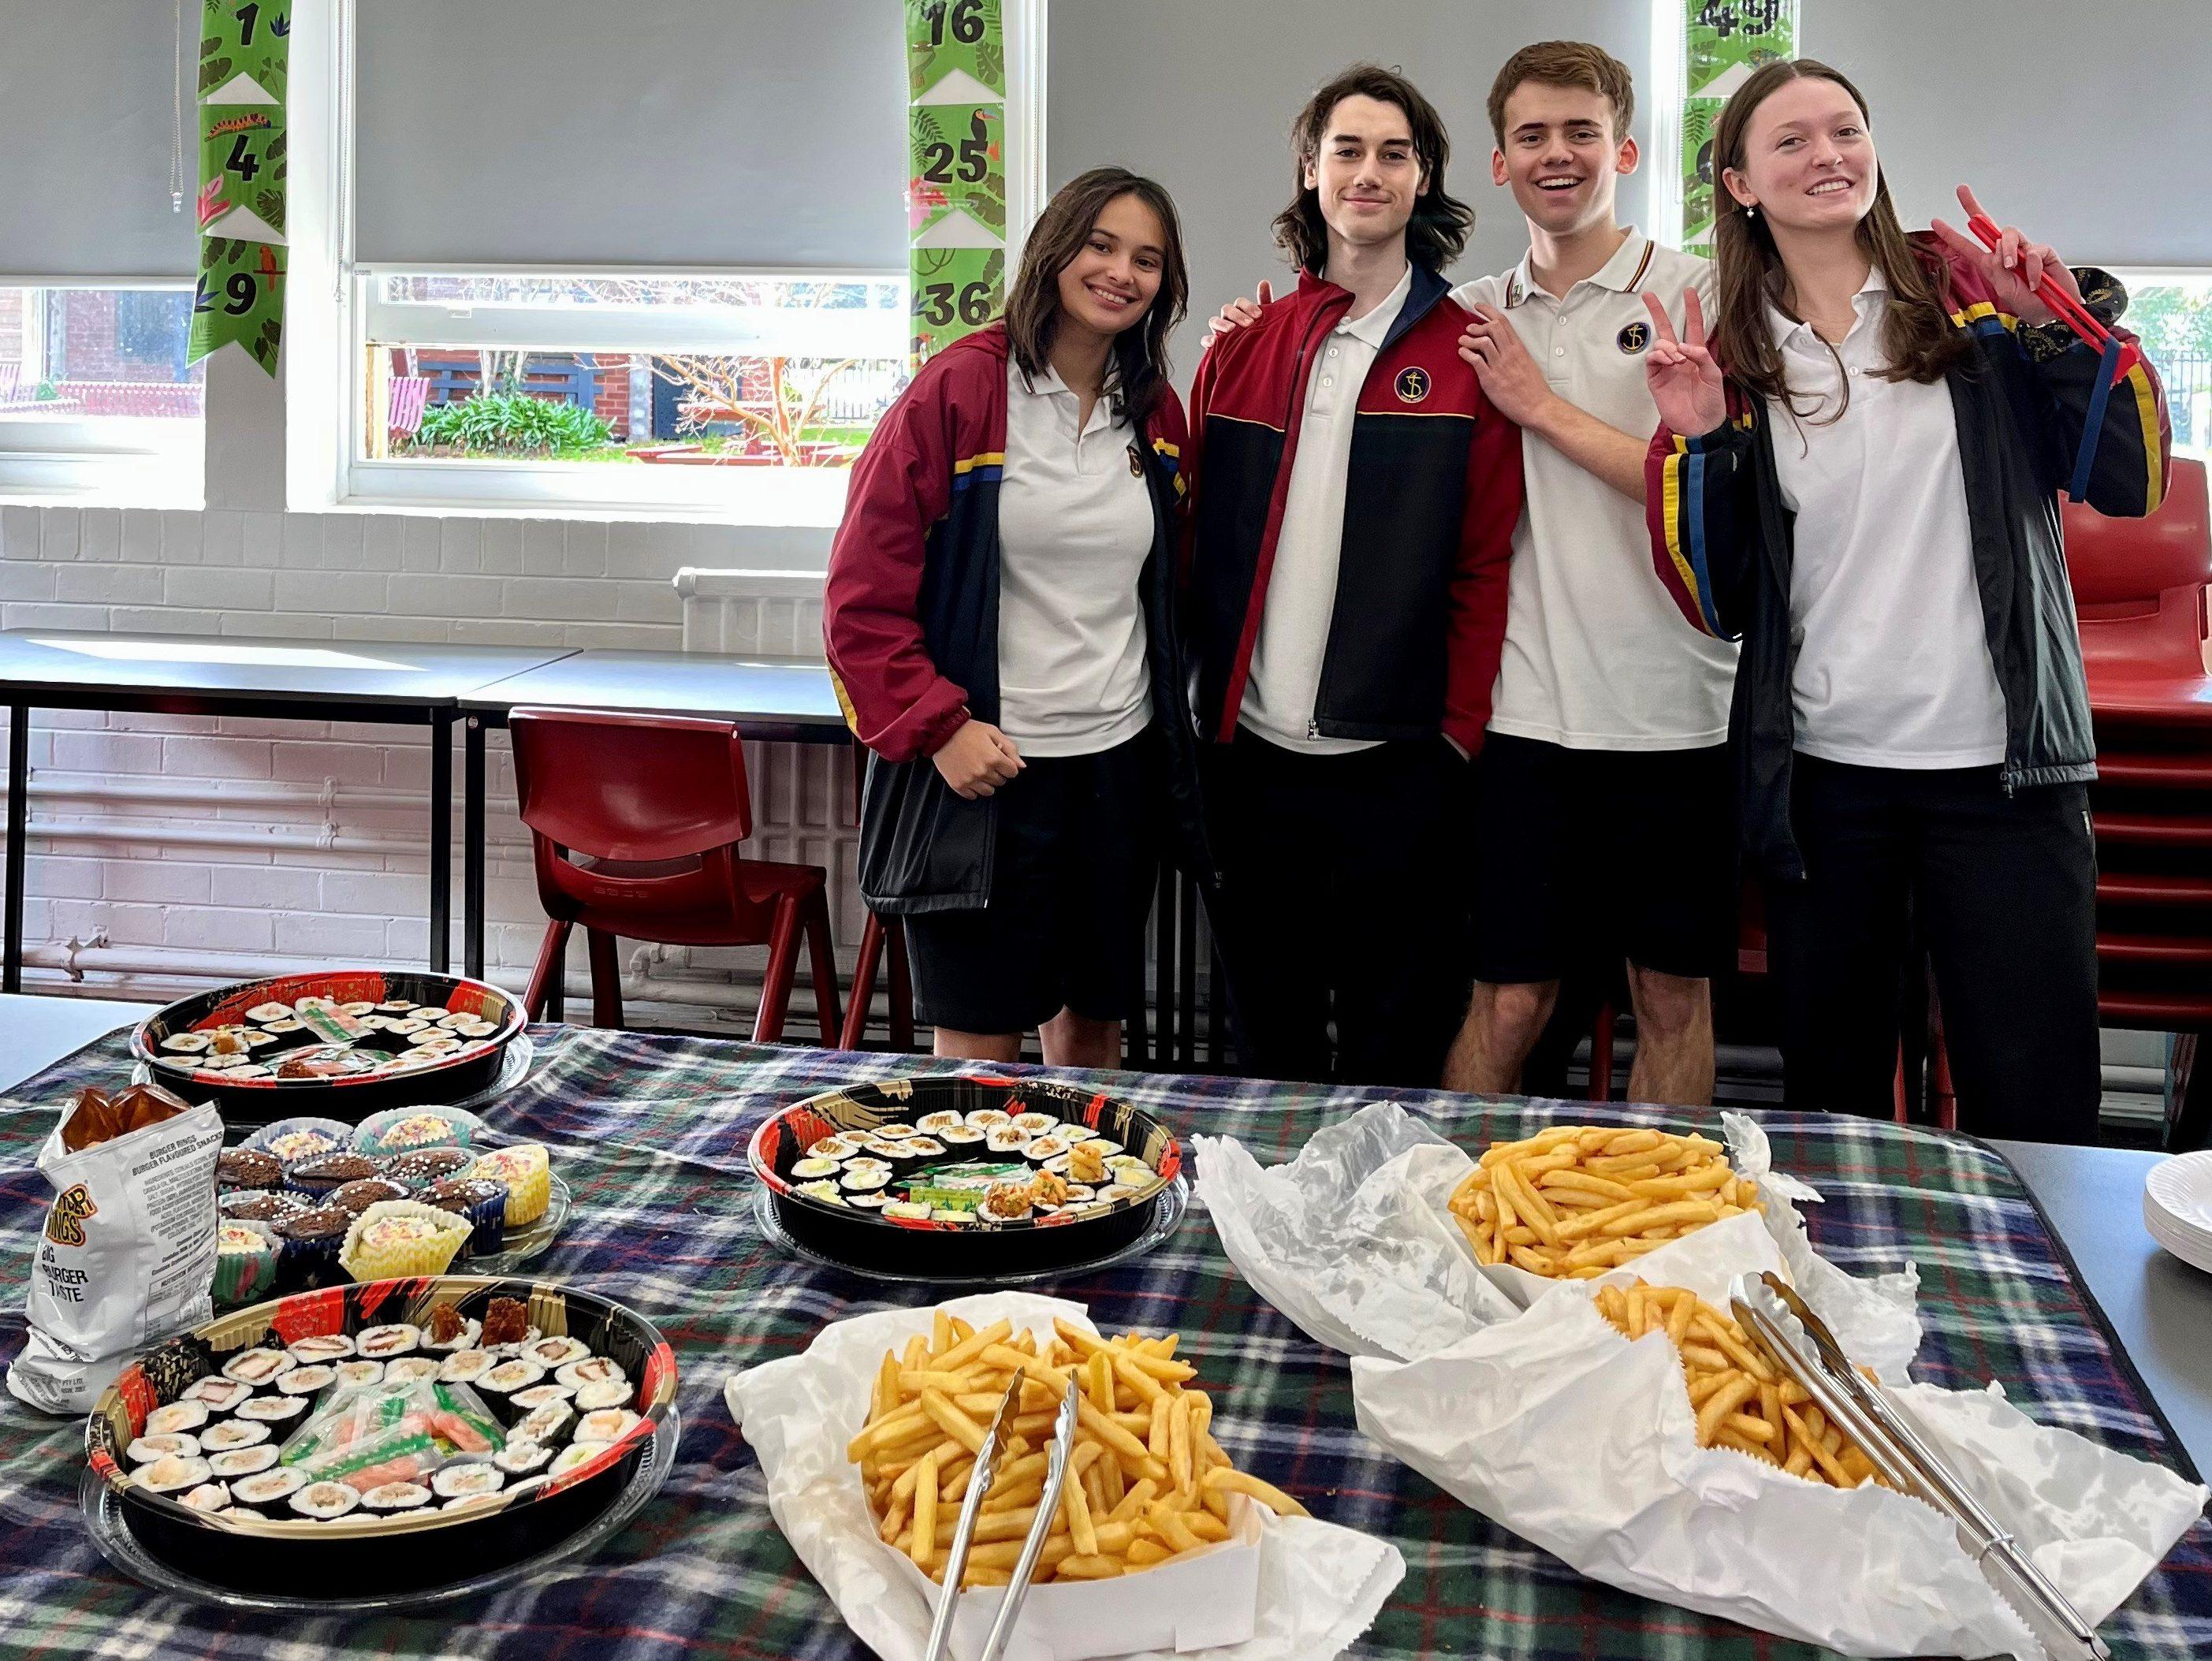 That winning lunch feeling for 11B students, winners of the Semester 1 Homegroup Challenege